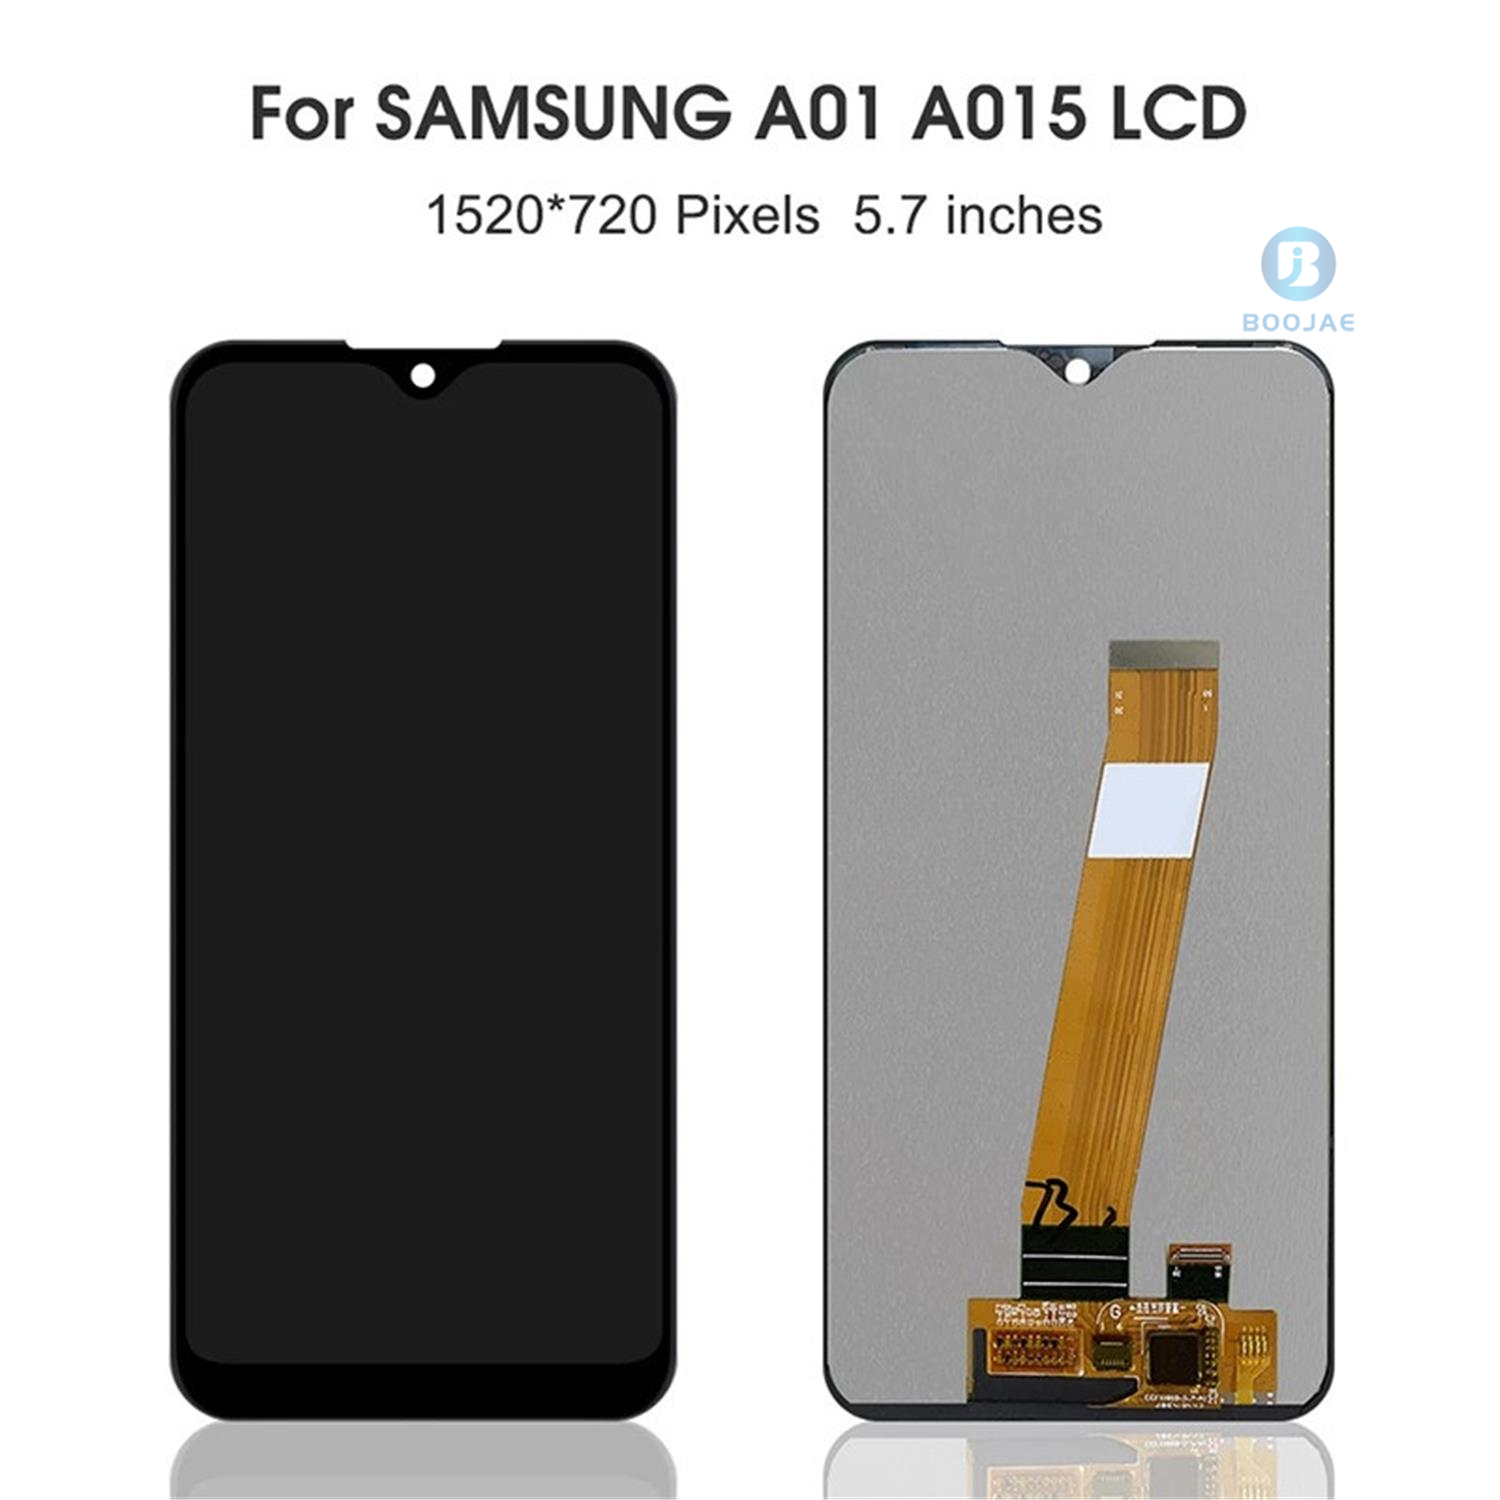 Samsung Galaxy A01 A015 LCD Screen Display and Touch Panel Digitizer Assembly Replacement